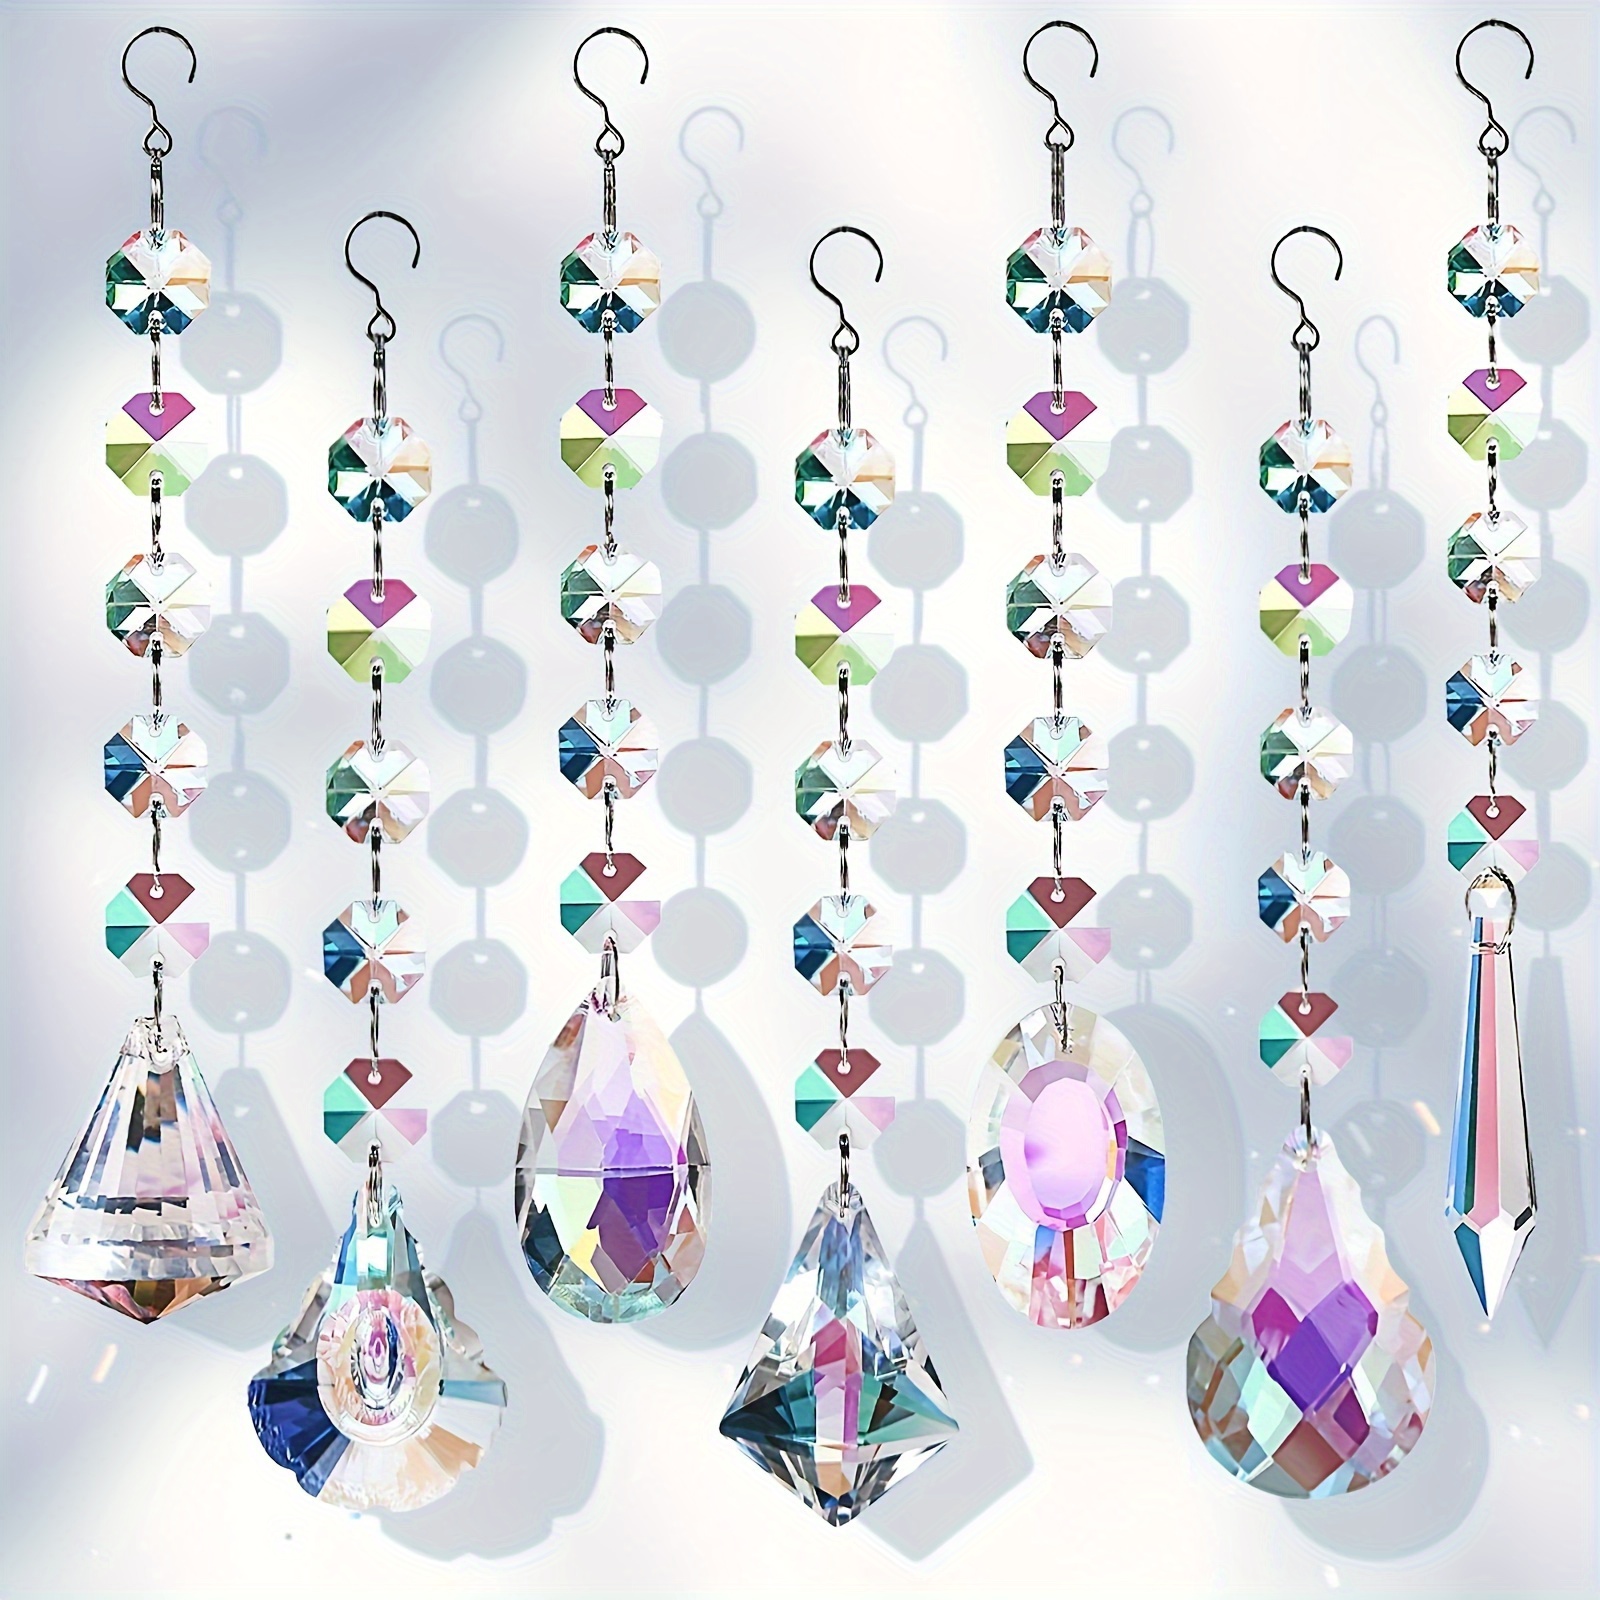 

7pcs Prism Glass Suncatchers, Color-changing Rainbow Sun Catcher Hanging Ornaments, Garden Decors Diy Pendant With Reflective Beads For Outdoor Display